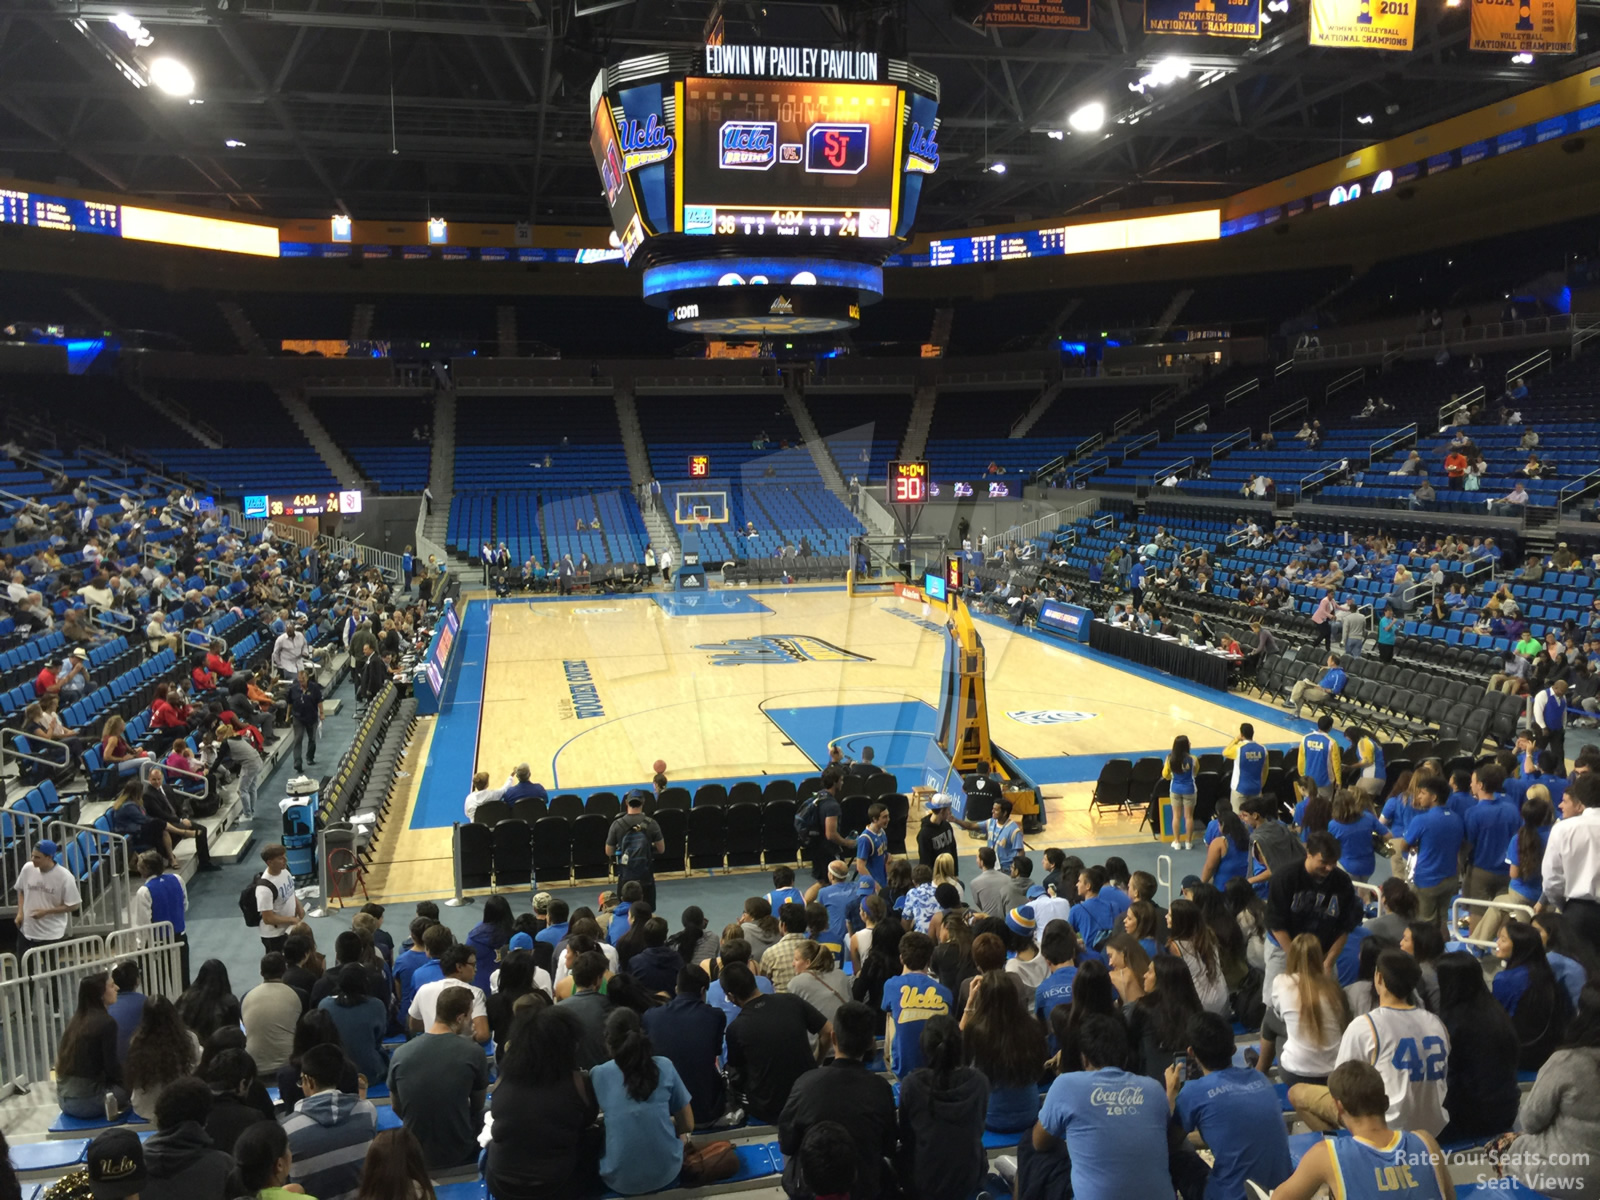 section 122, row 3 seat view  - pauley pavilion